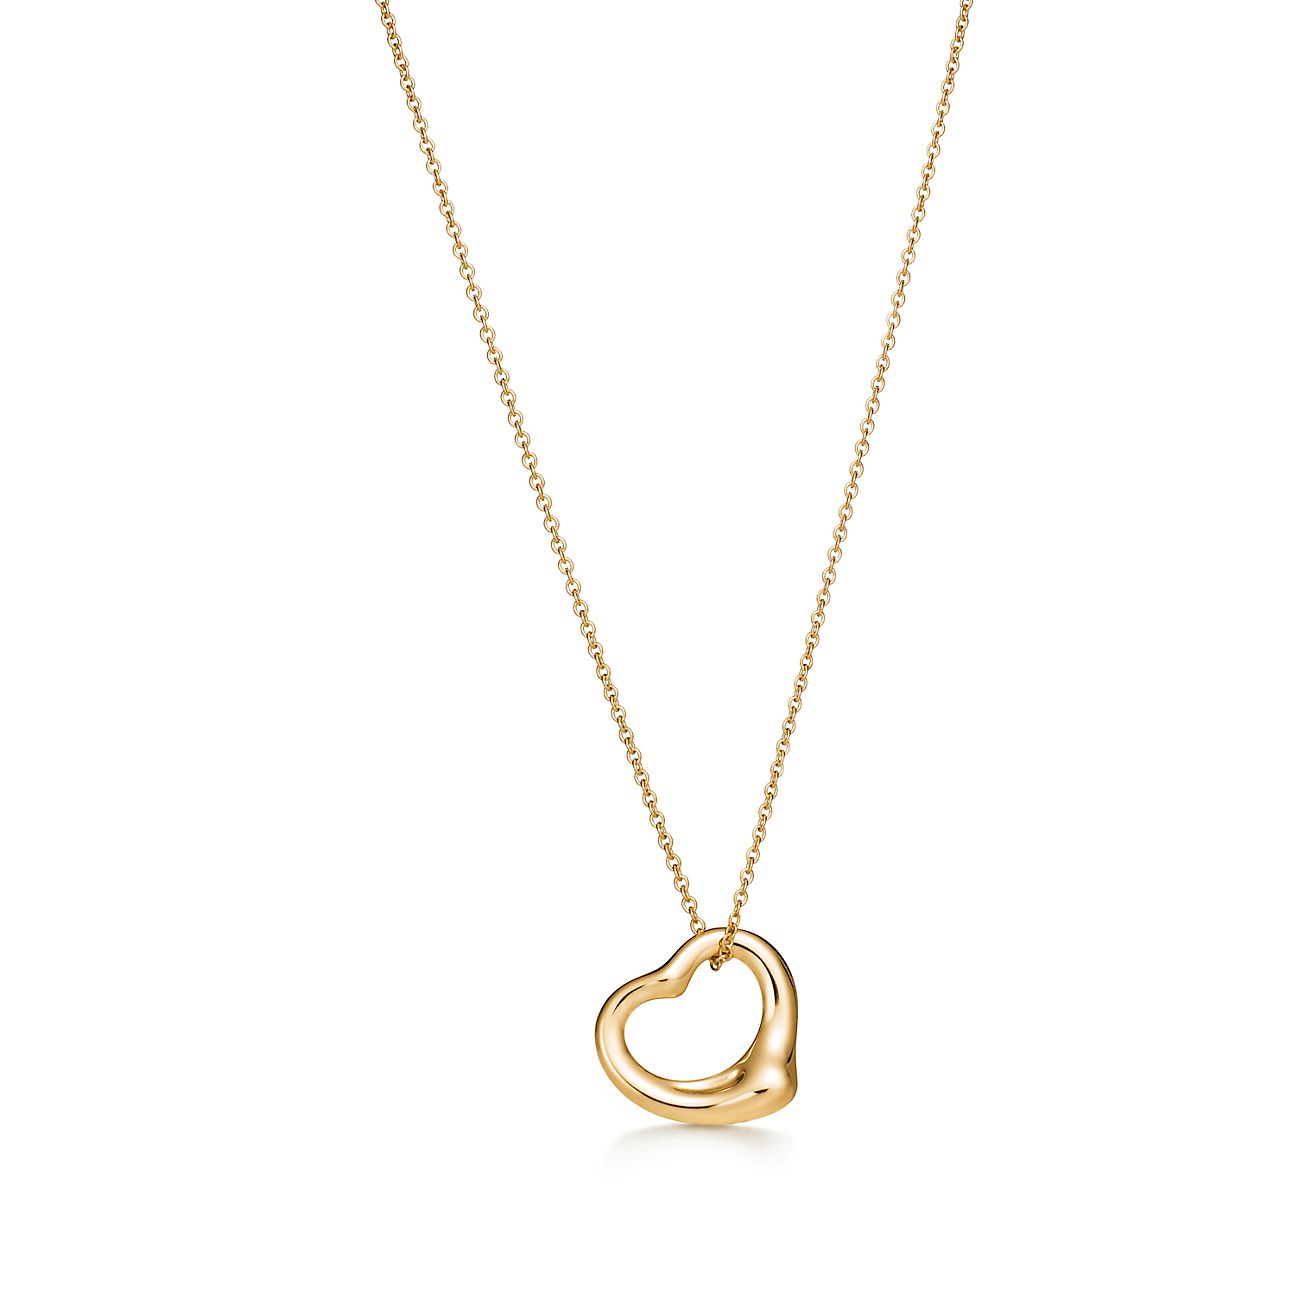 Millennial-Approved Heart Jewelry Is Trending Again in 2024